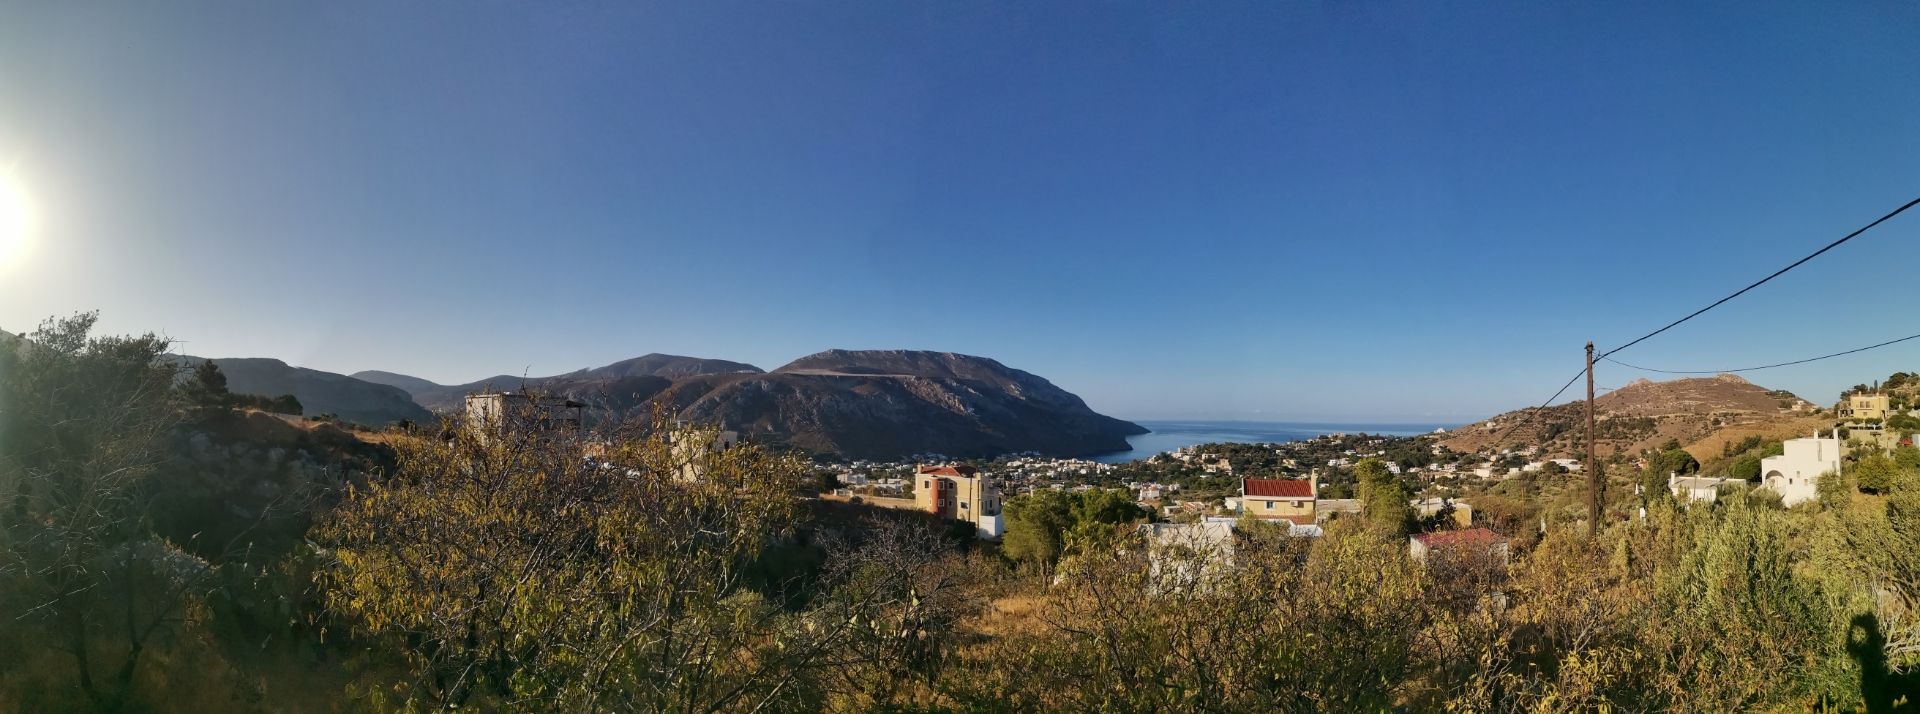 Villa with a view on Kalymnos